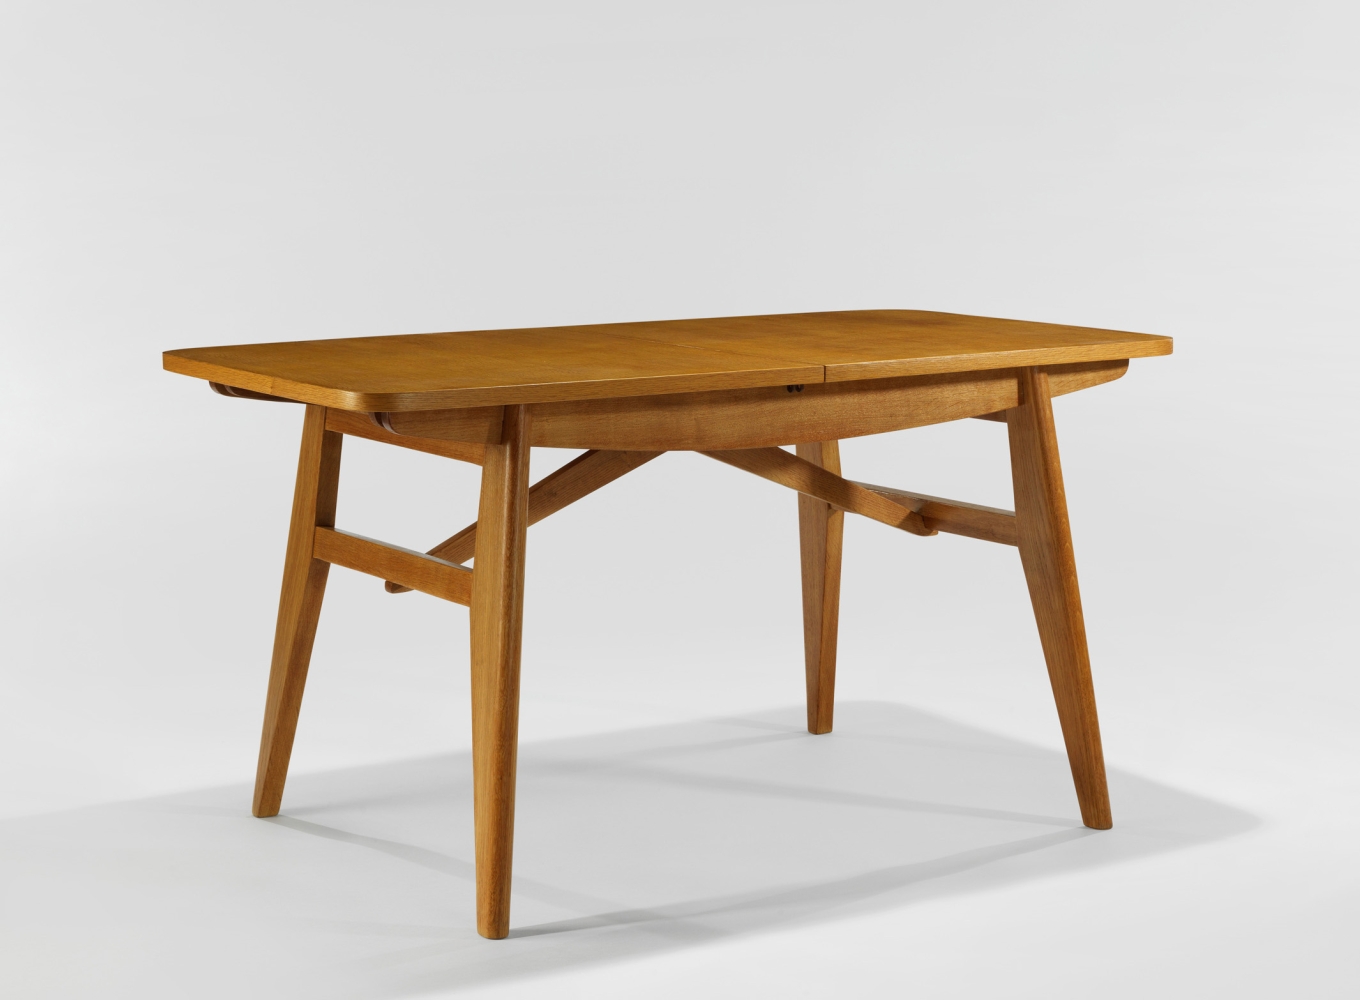 René-Jean Caillette | Dining Table with Extension, c. 1950